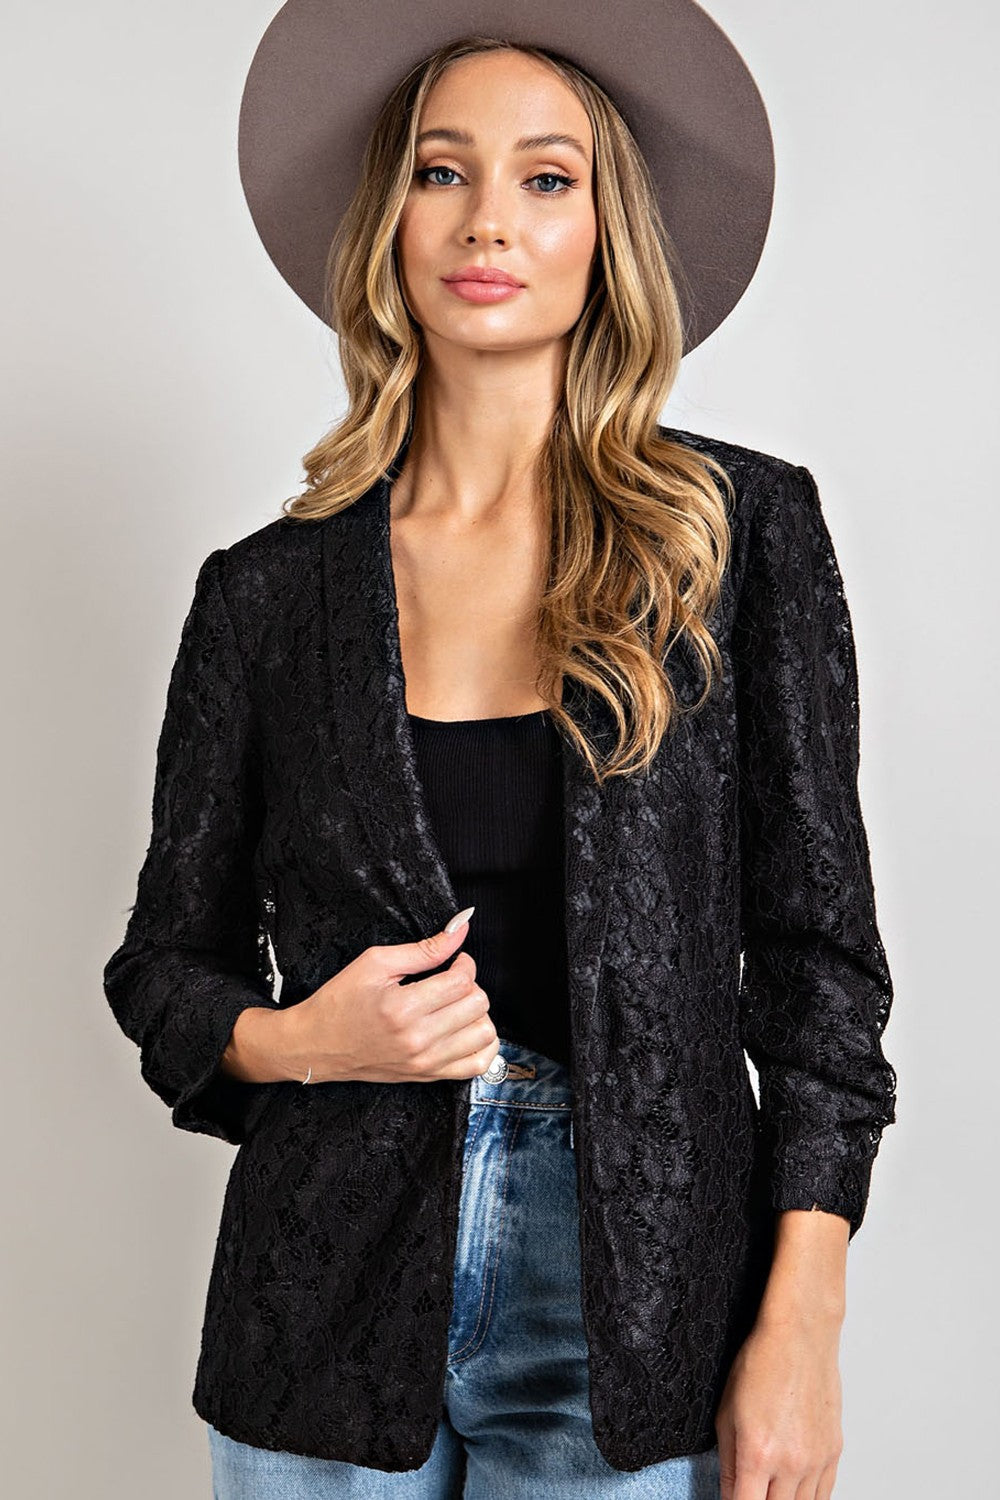 Fitted Lace Blazer - Lark & Lily Boutique